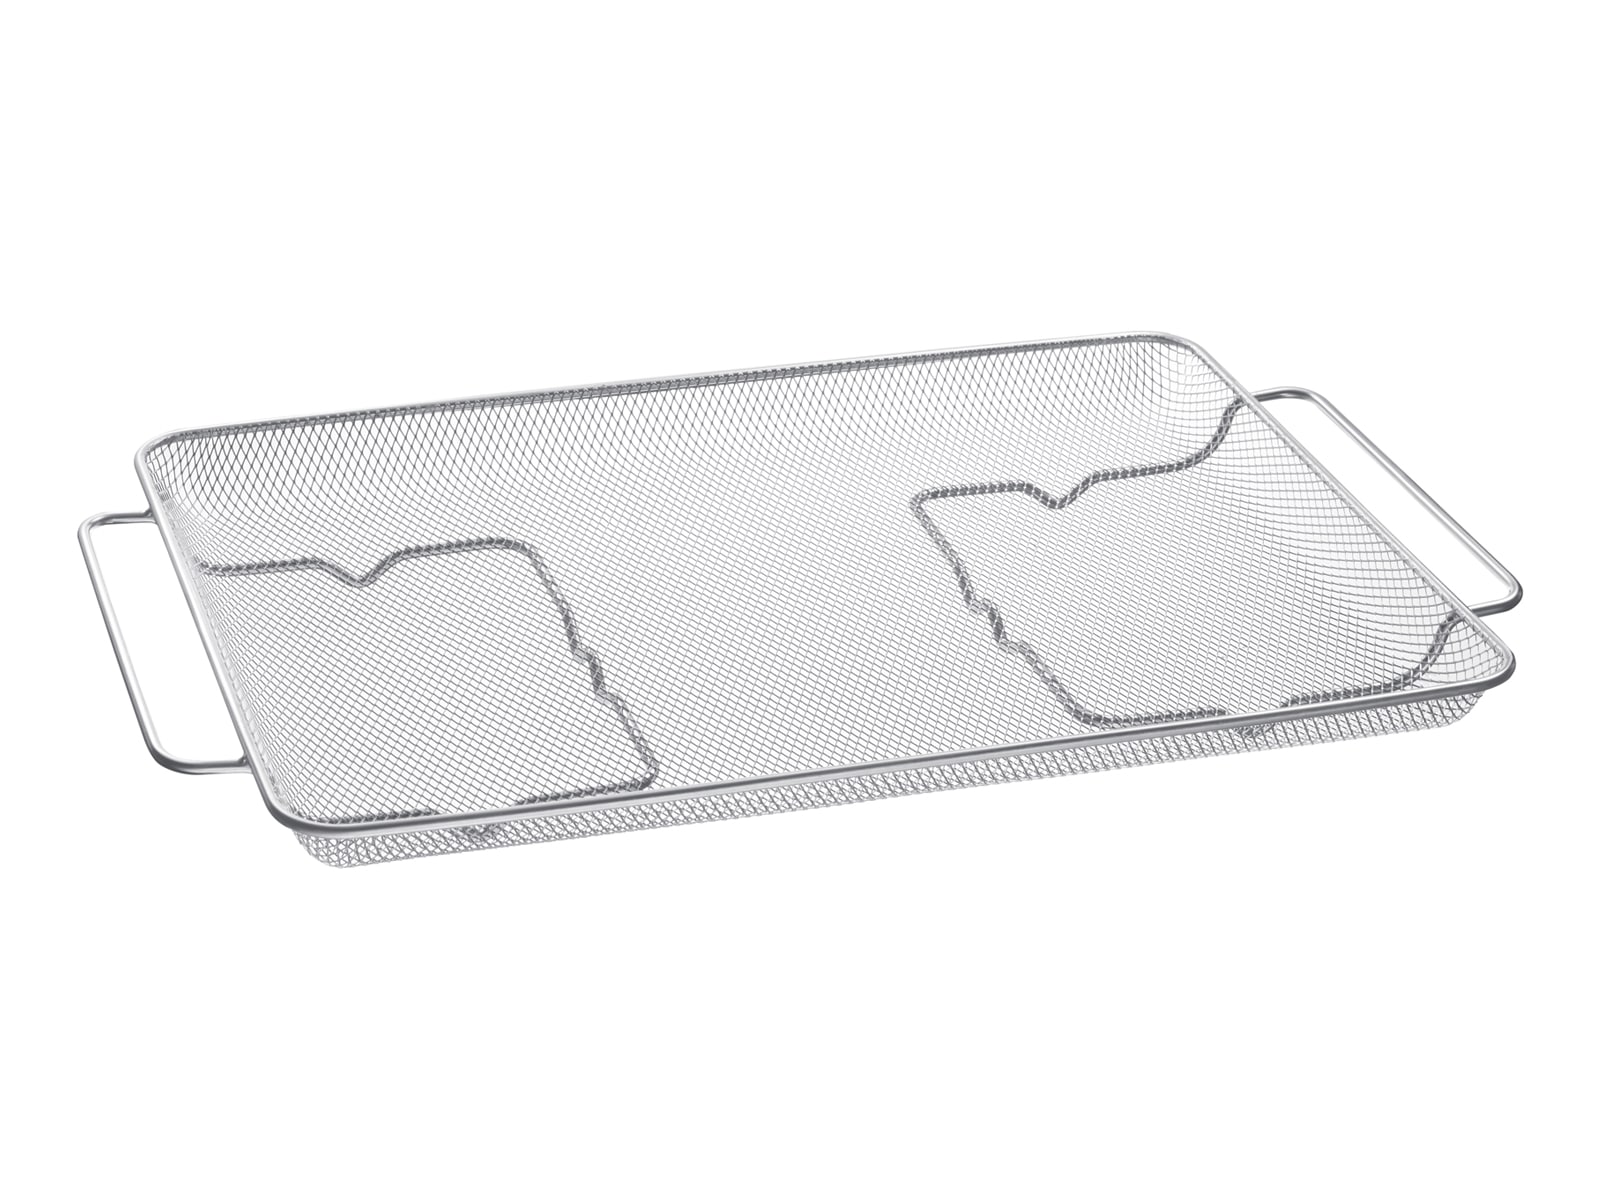 Frigidaire® ReadyCook™ 27 Stainless Steel Air Fry Tray